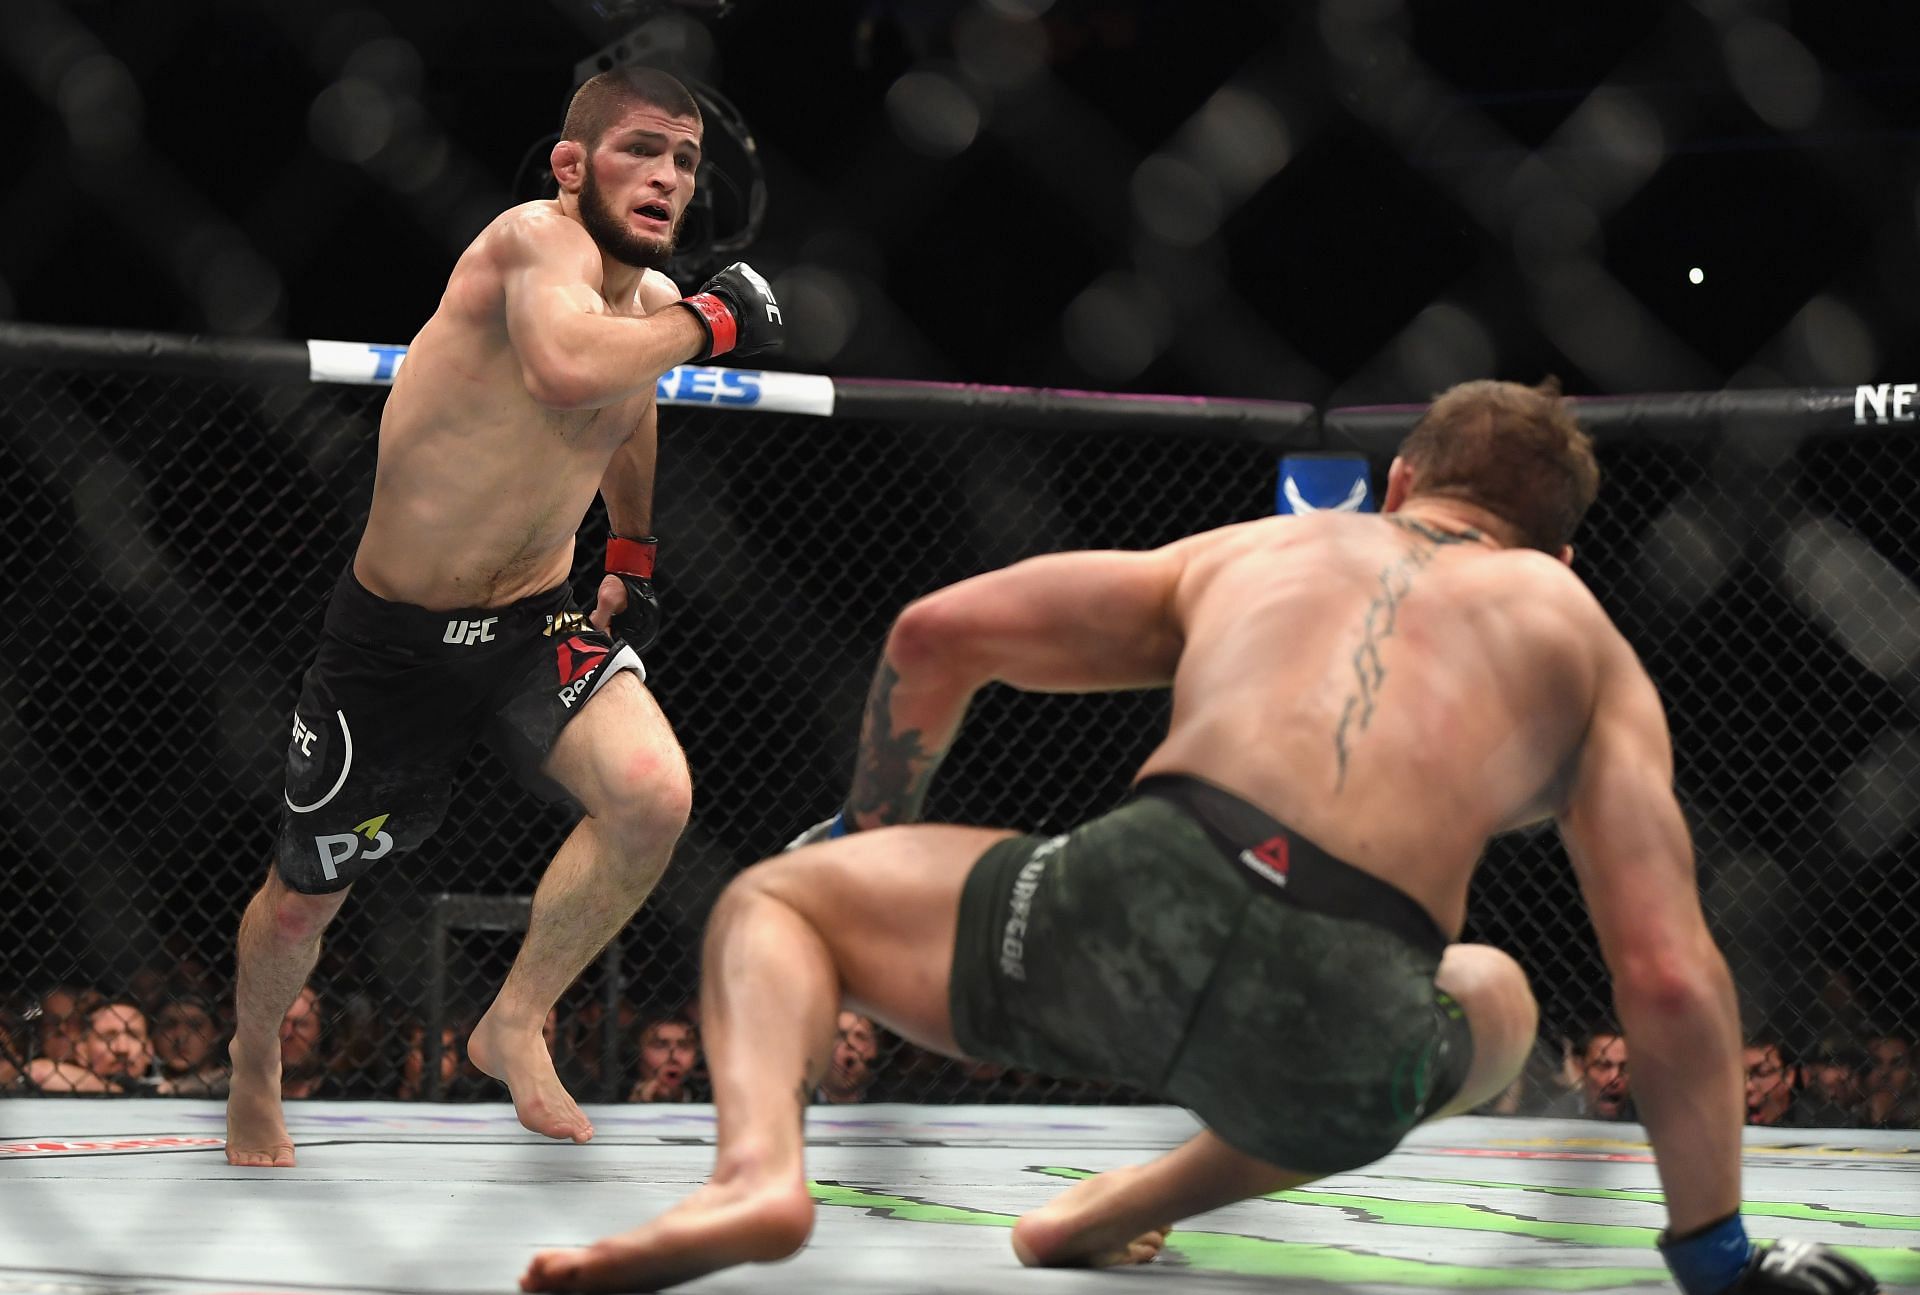 Khabib Nurmagomedov left nothing to doubt by destroying Conor McGregor in their eventual fight